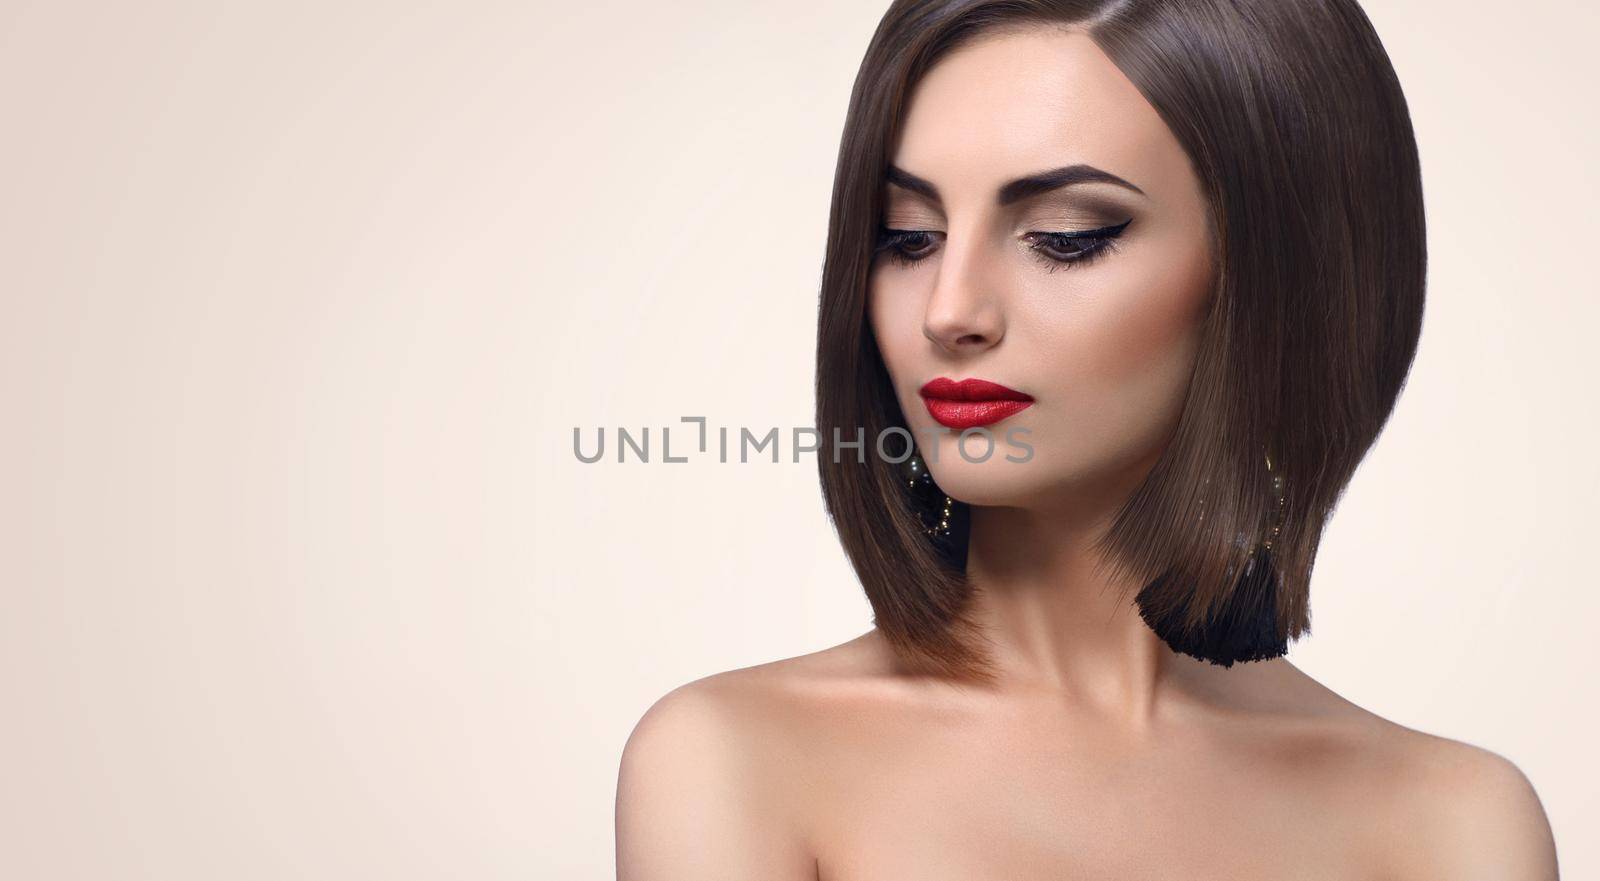 Young fashion model posing sensually looking away wearing black dress and evening makeup with red lips and smoky eyes copyspace beauty fashion style elegance cosmetics concept.